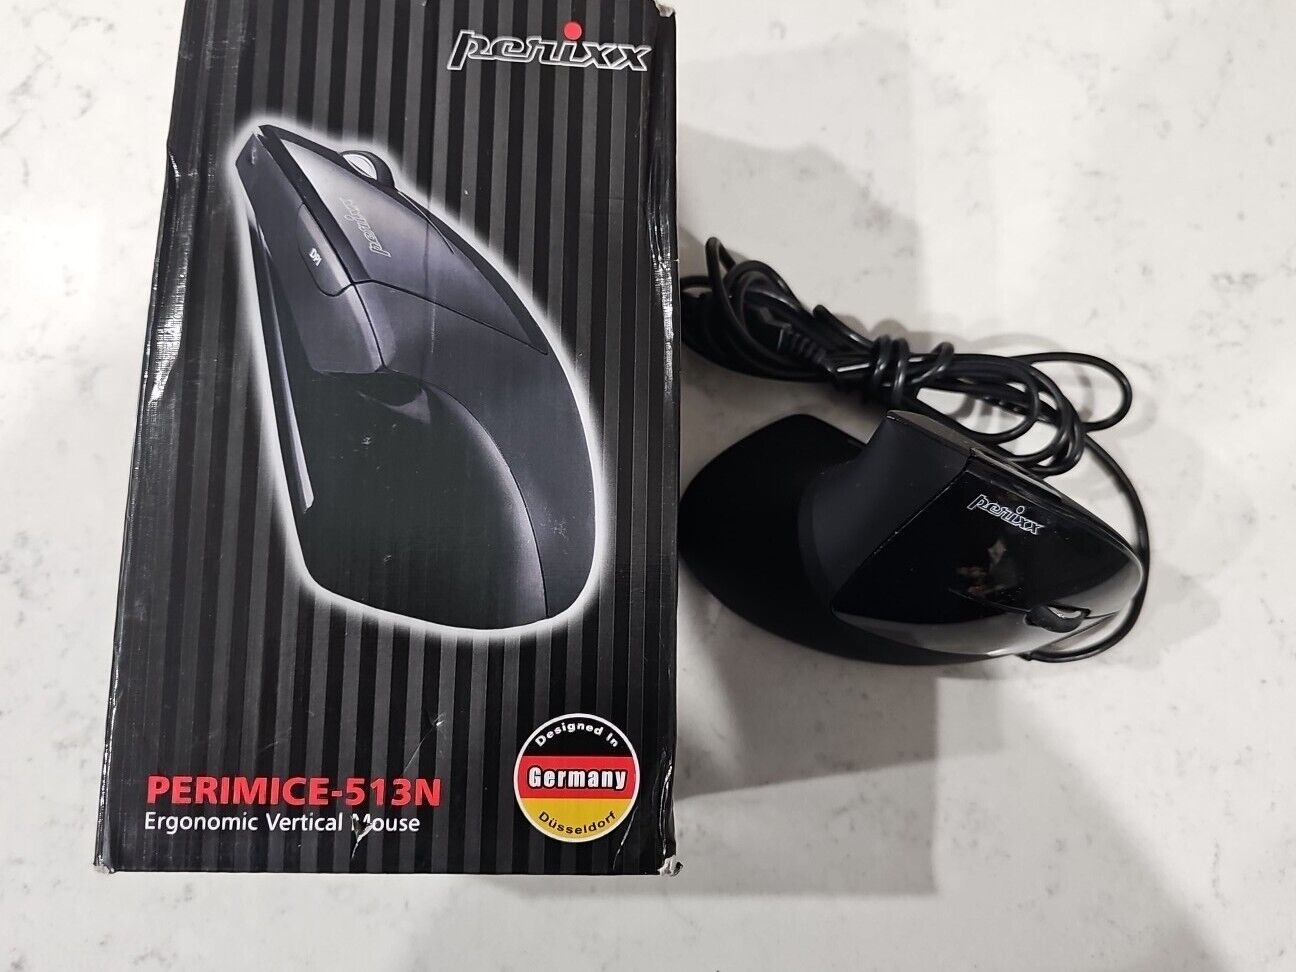 Perixx Ergonomical Vertical Mouse, Perimice-513N. Black, Wired 4 IBM. Right hand